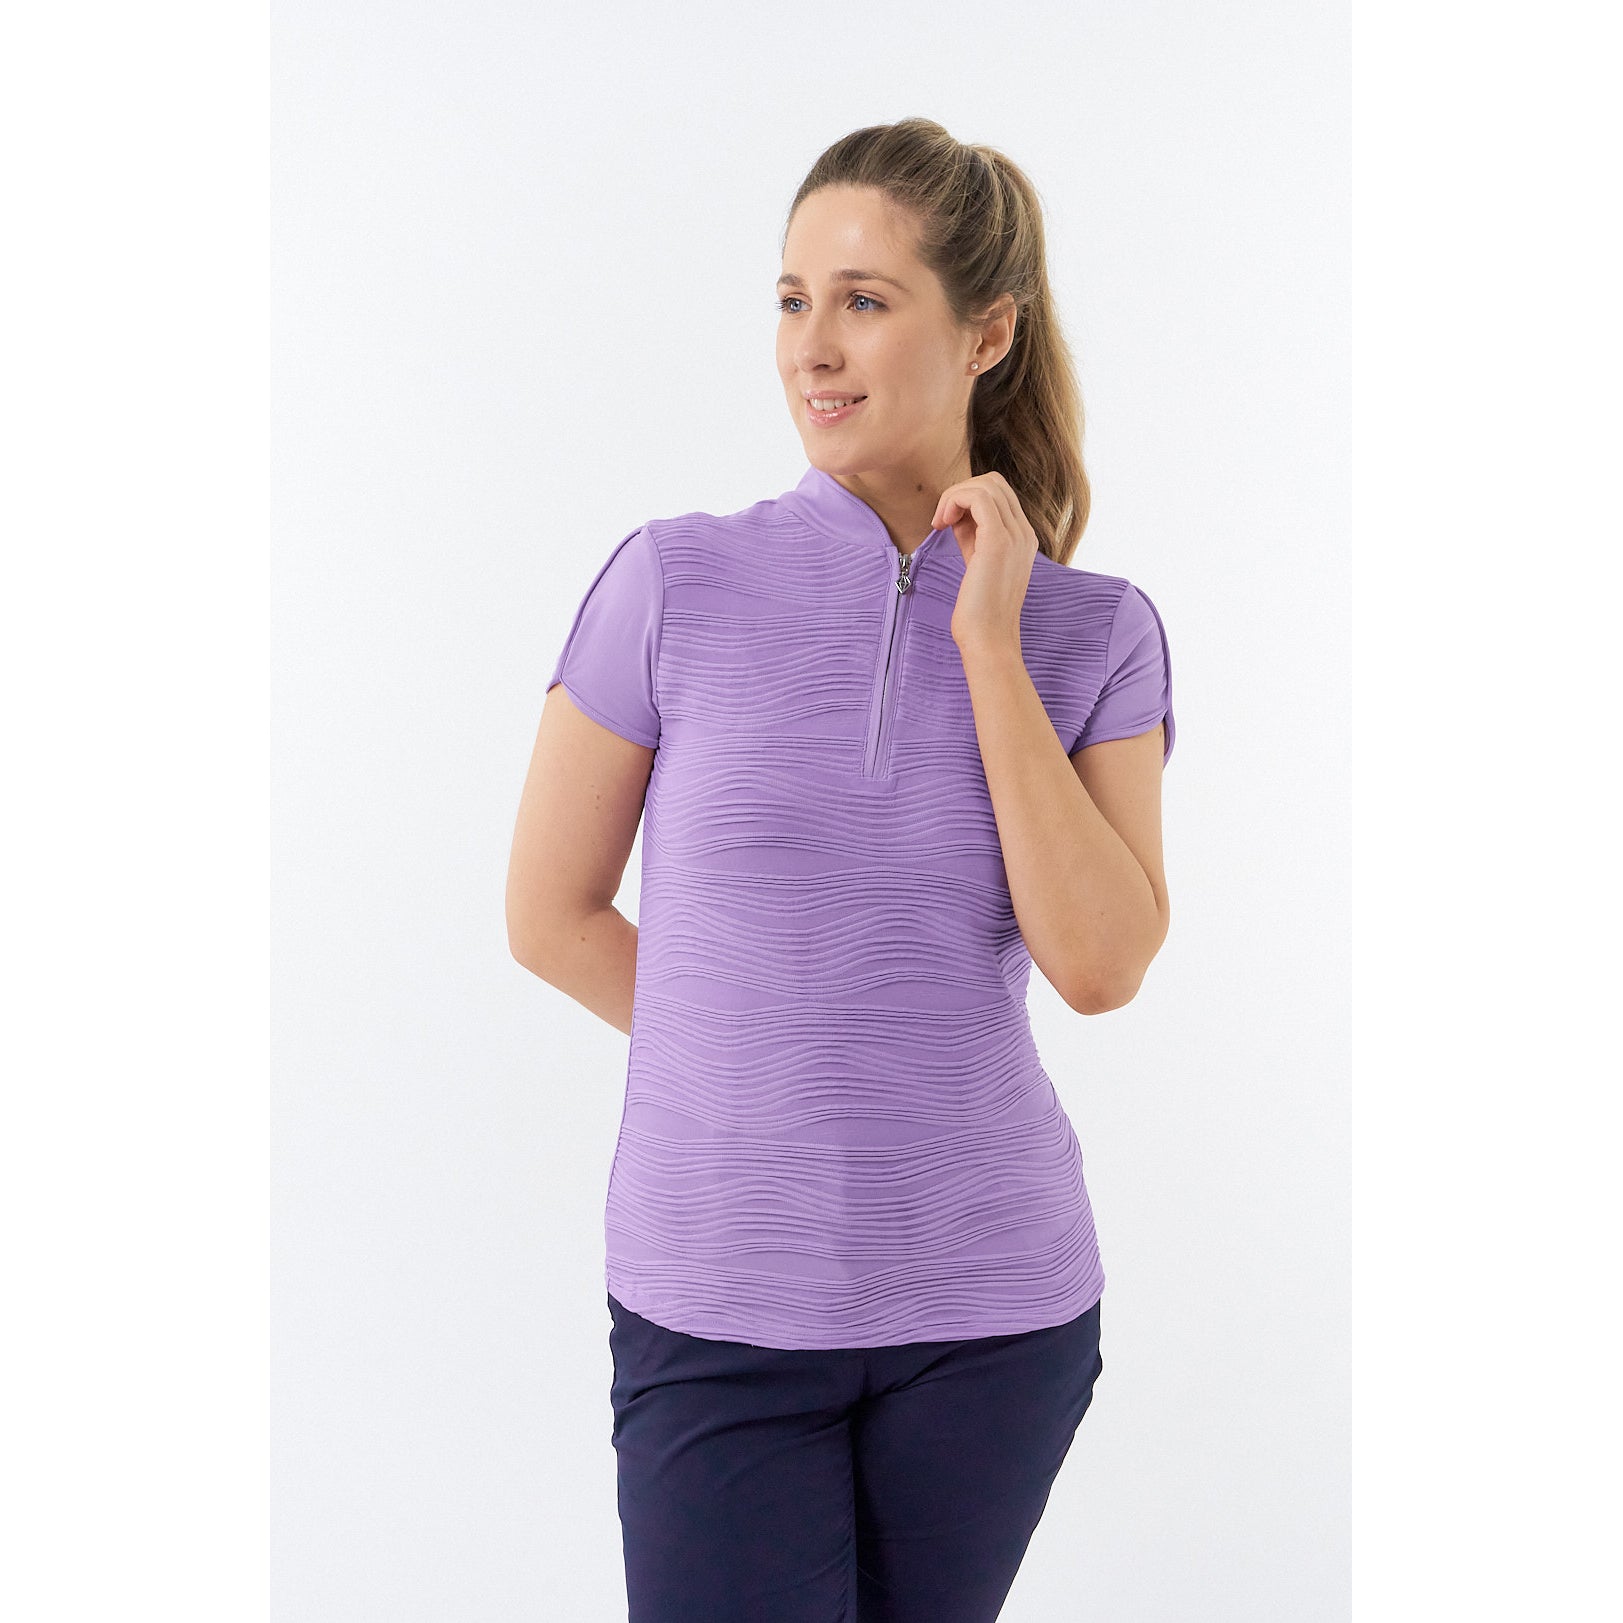 Pure Ladies Textured Wave Print Cap Polo Shirt in Lilac - Last One Medium Only Left